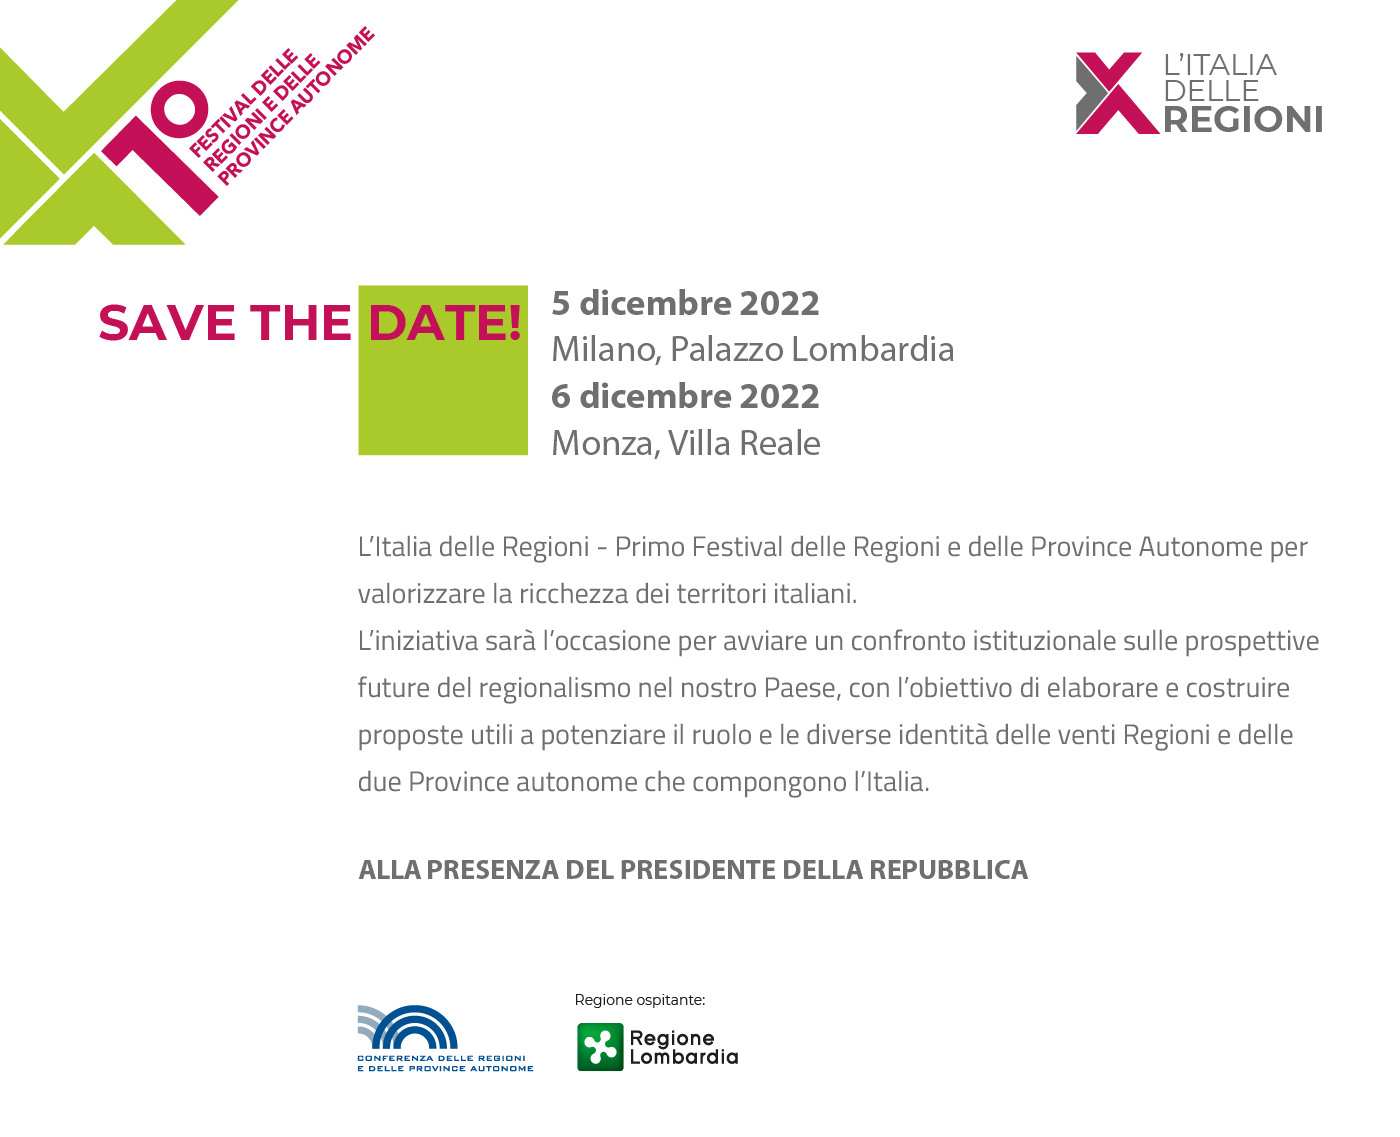 file/ELEMENTO_NEWSLETTER/24934/Save-the-date_UFFICIALE_festival_regioni_5_6_12_22_NL.png